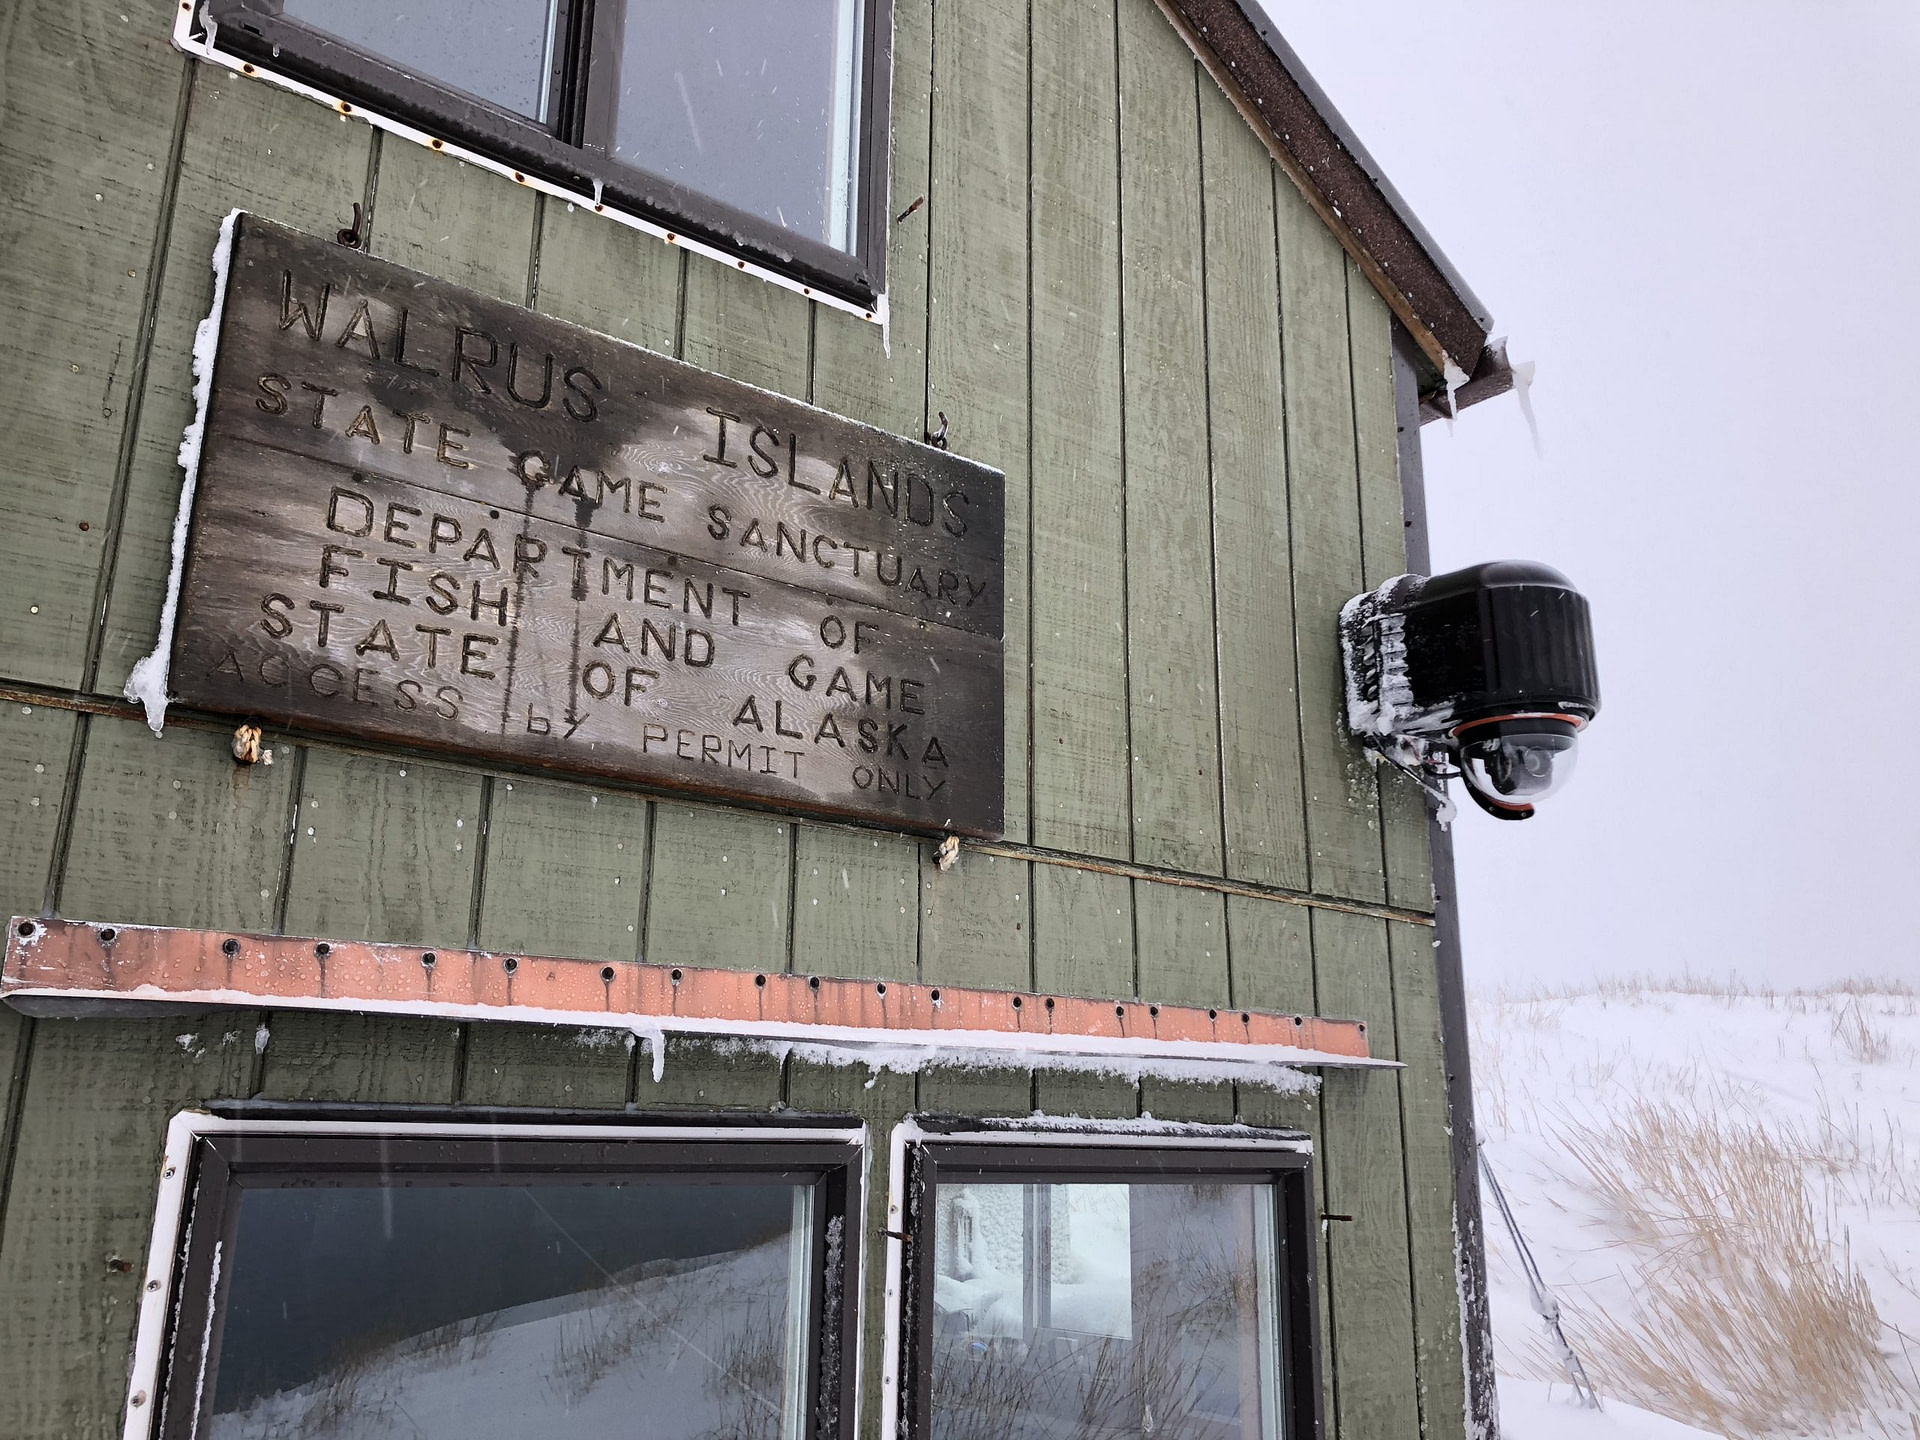 XClear Self Cleaning Camera Enclosure System Installed On Alaska Fish And Game Cabin On Round Island In Alaska 